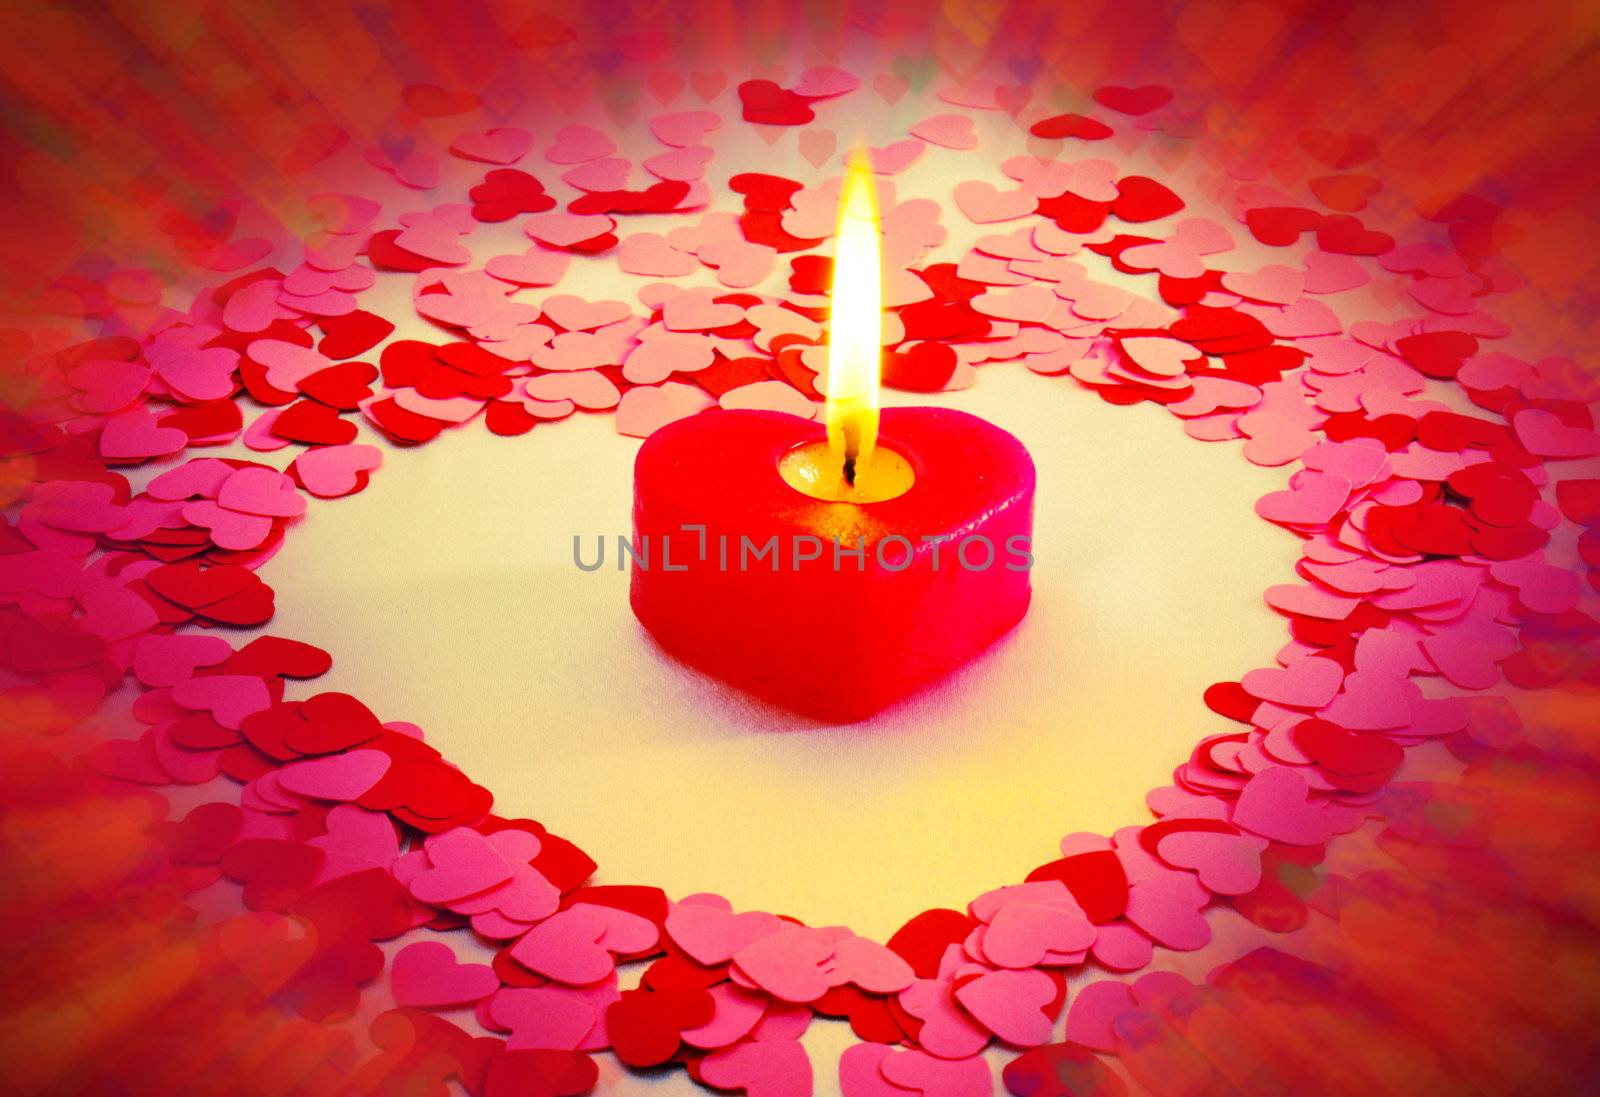 Burning red heart shaped candle over blurry colorful background